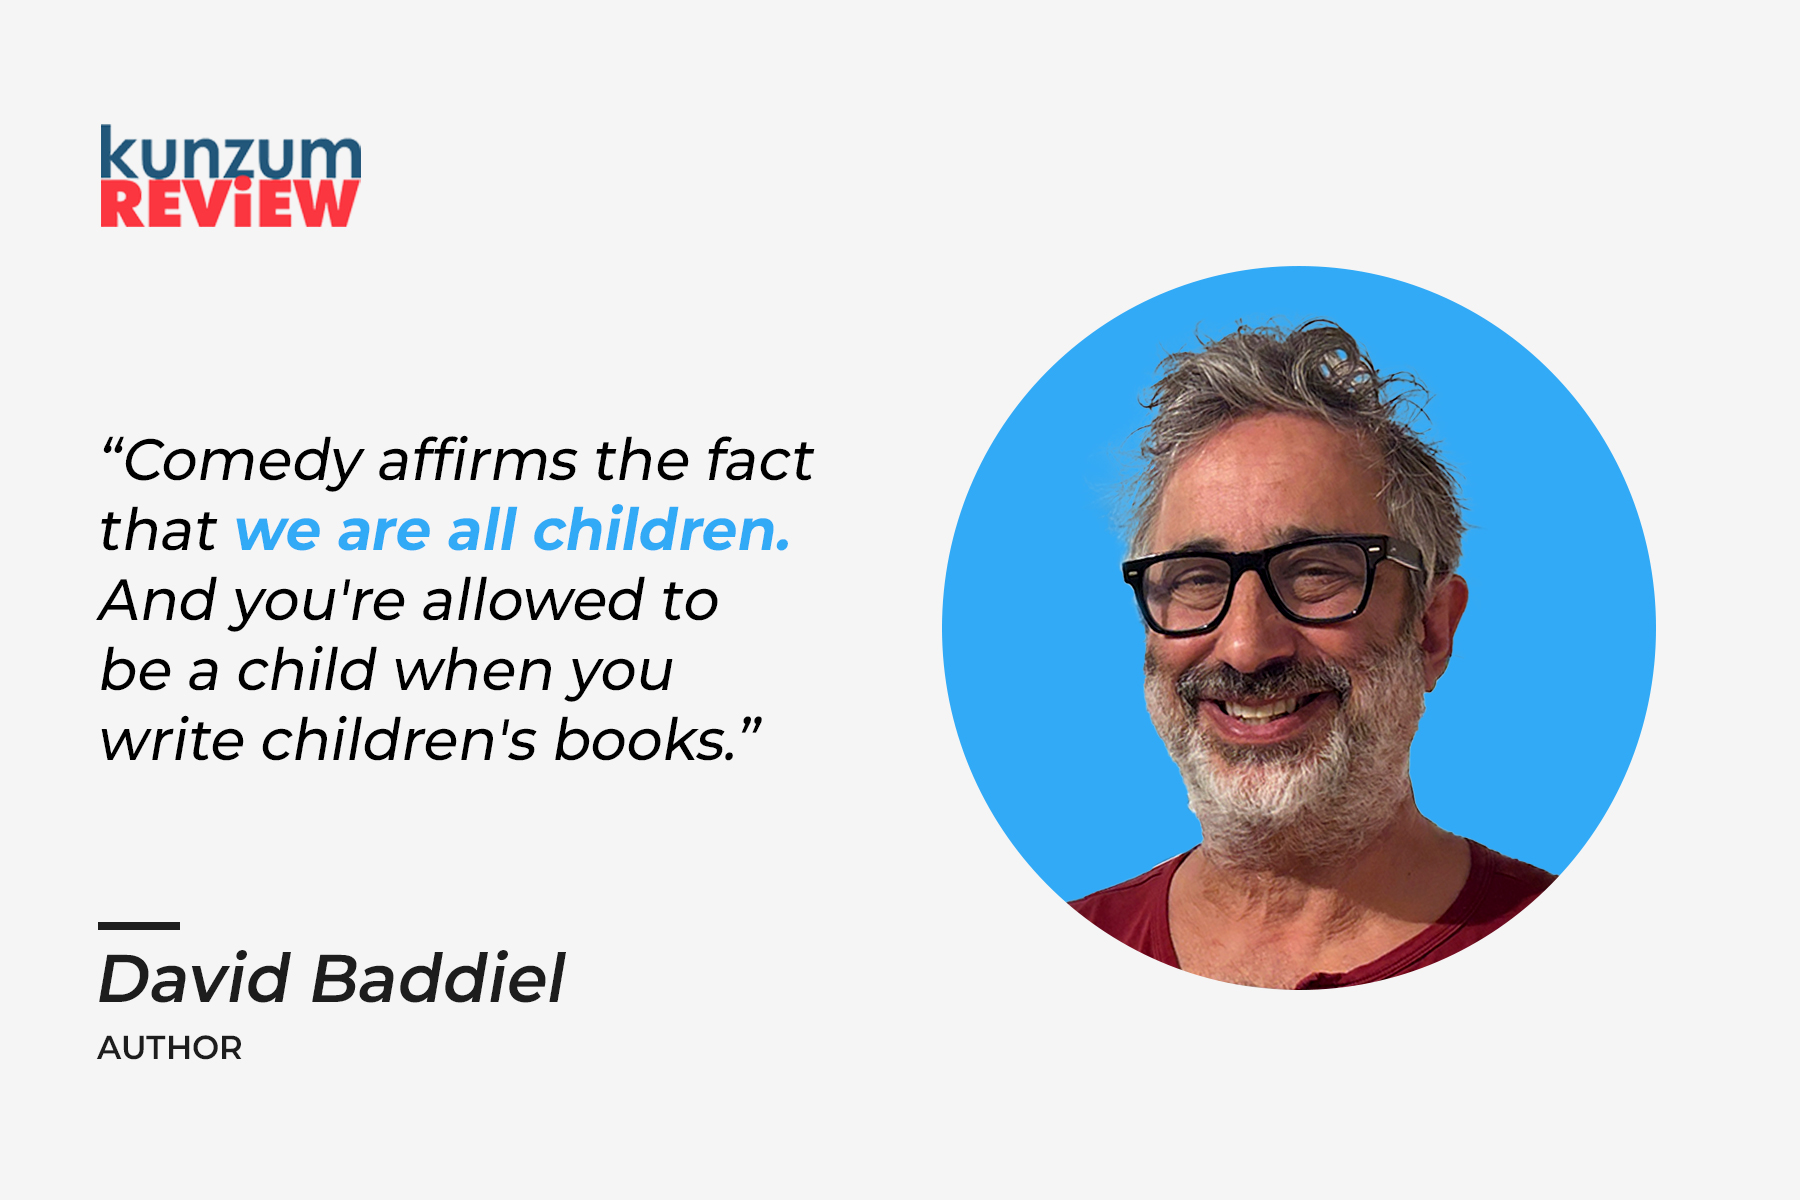 Author Interview: “Comedy affirms the fact that we are all children. And you’re allowed to be a child when you write children’s books”, says David Baddiel